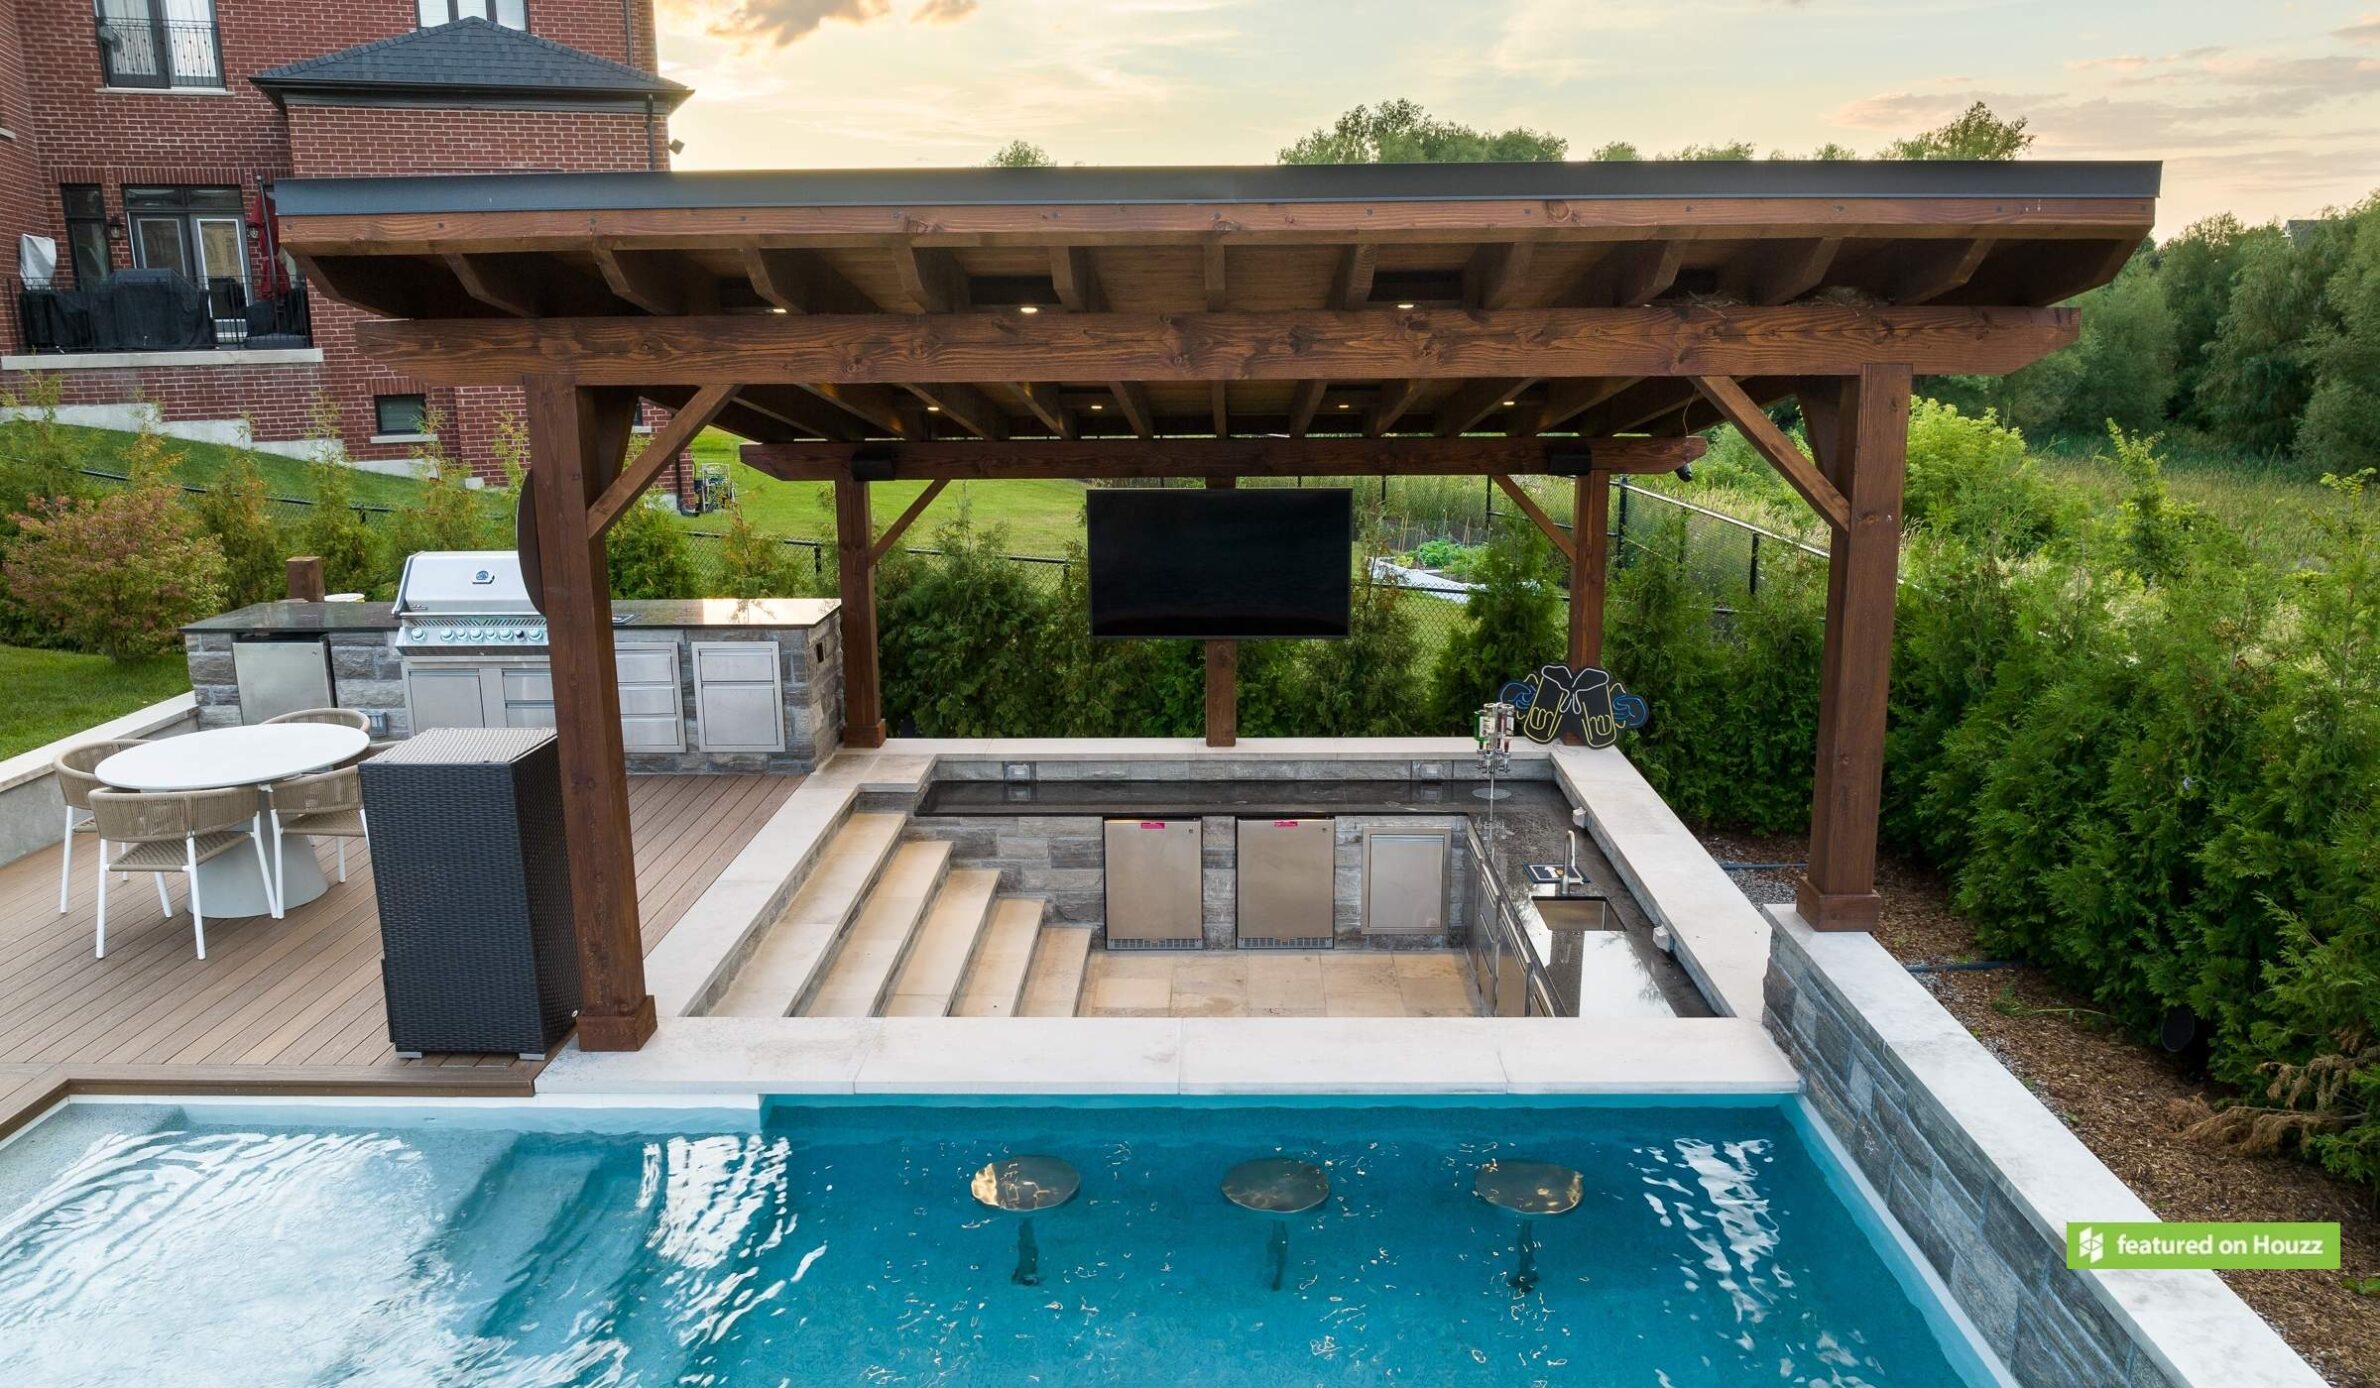 An outdoor pool with a wooden pergola, a sunken seating area, a mounted television, and a built-in grill station set amidst a landscaped background.